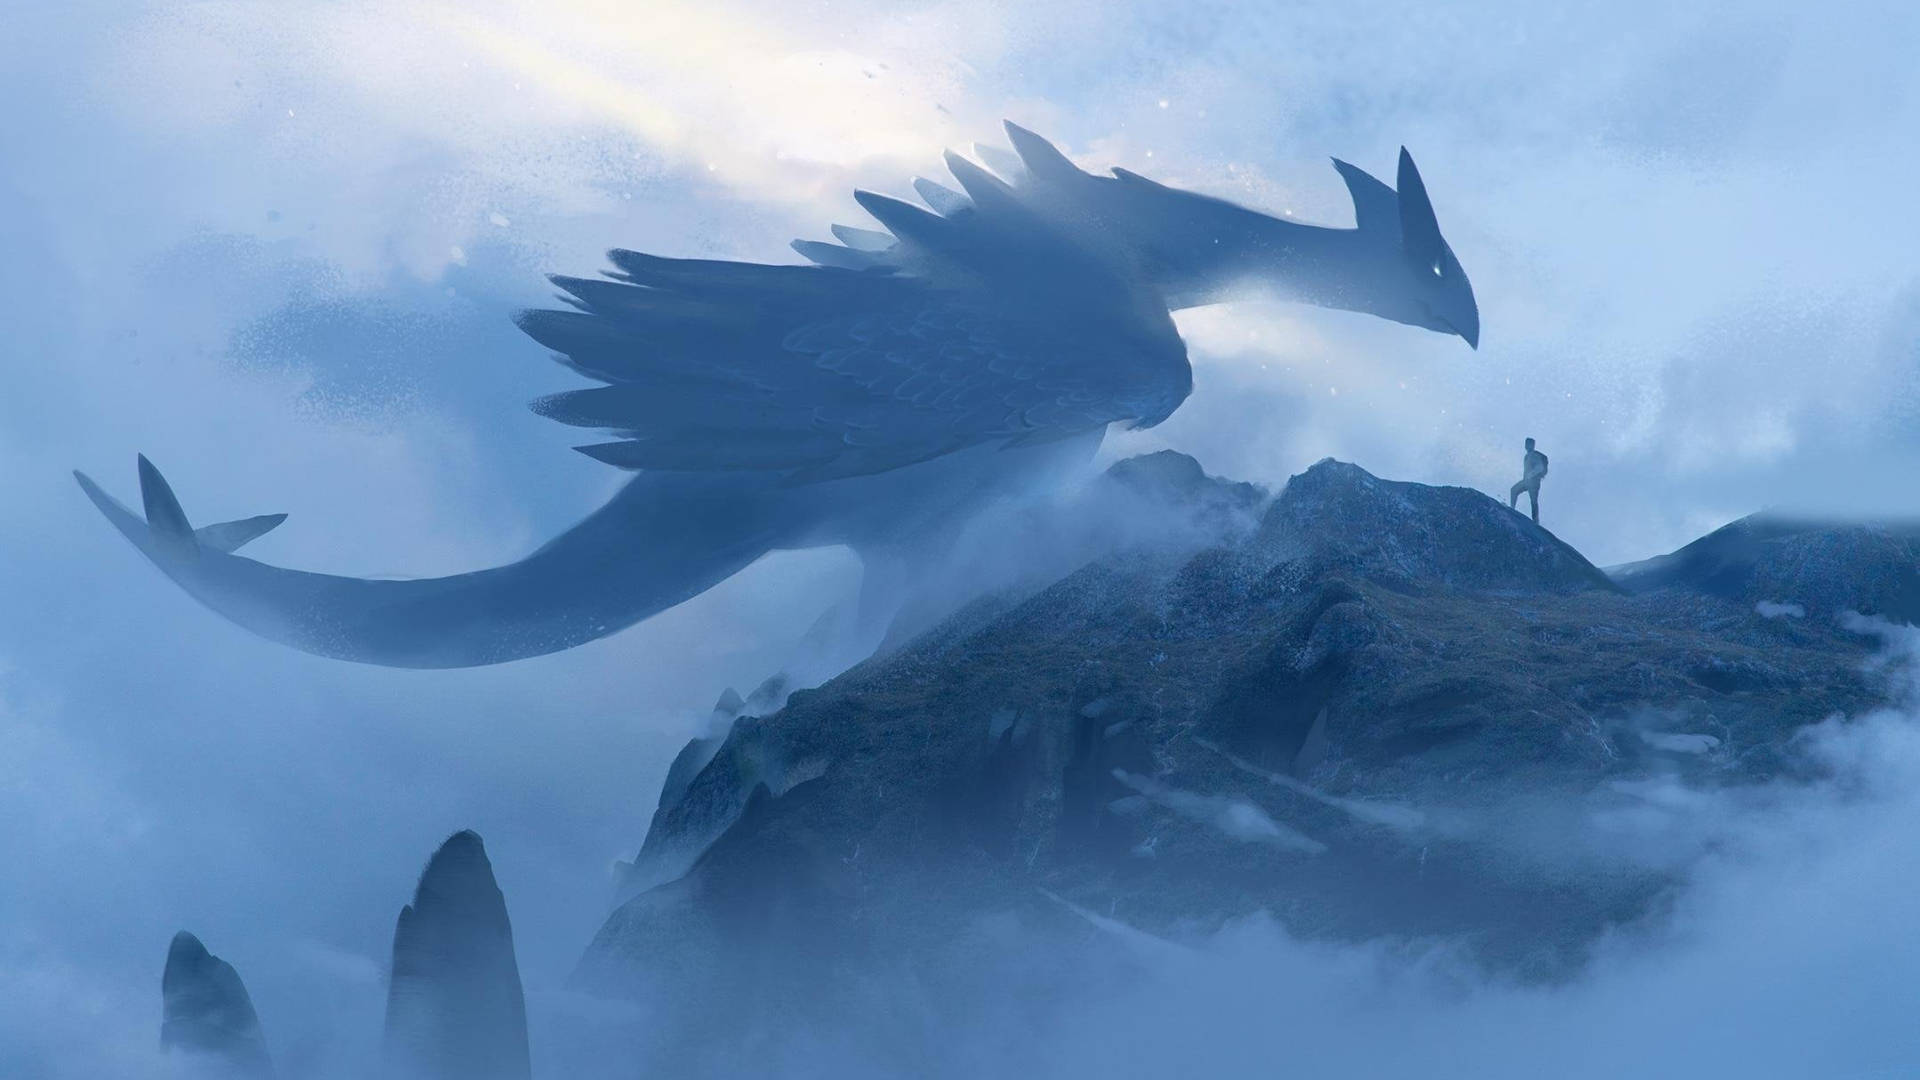 Lugia 1920X1080 Wallpaper and Background Image